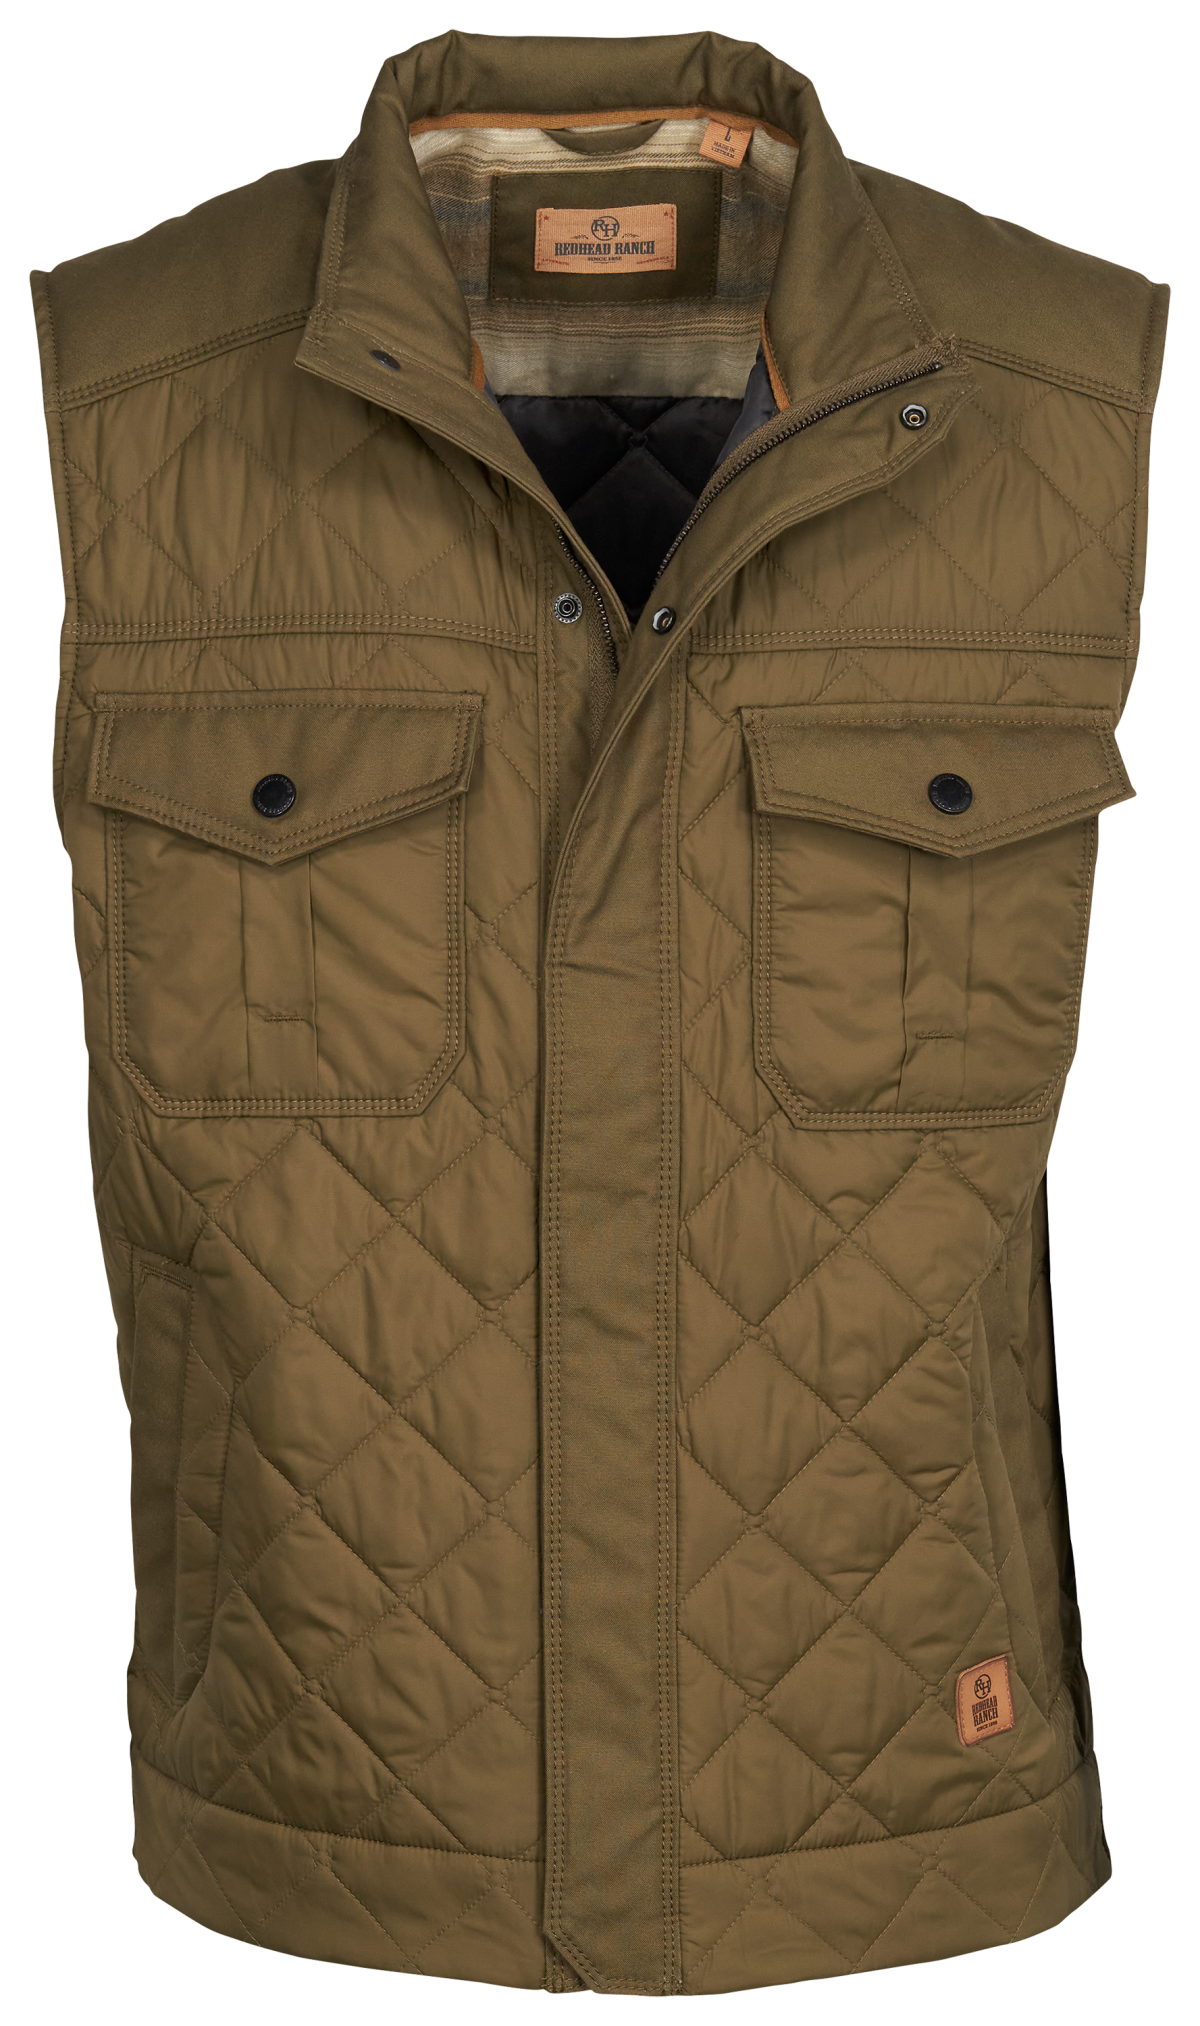 RedHead Ranch Thunder Rock Quilted Vest for Men - Beech - 2XL